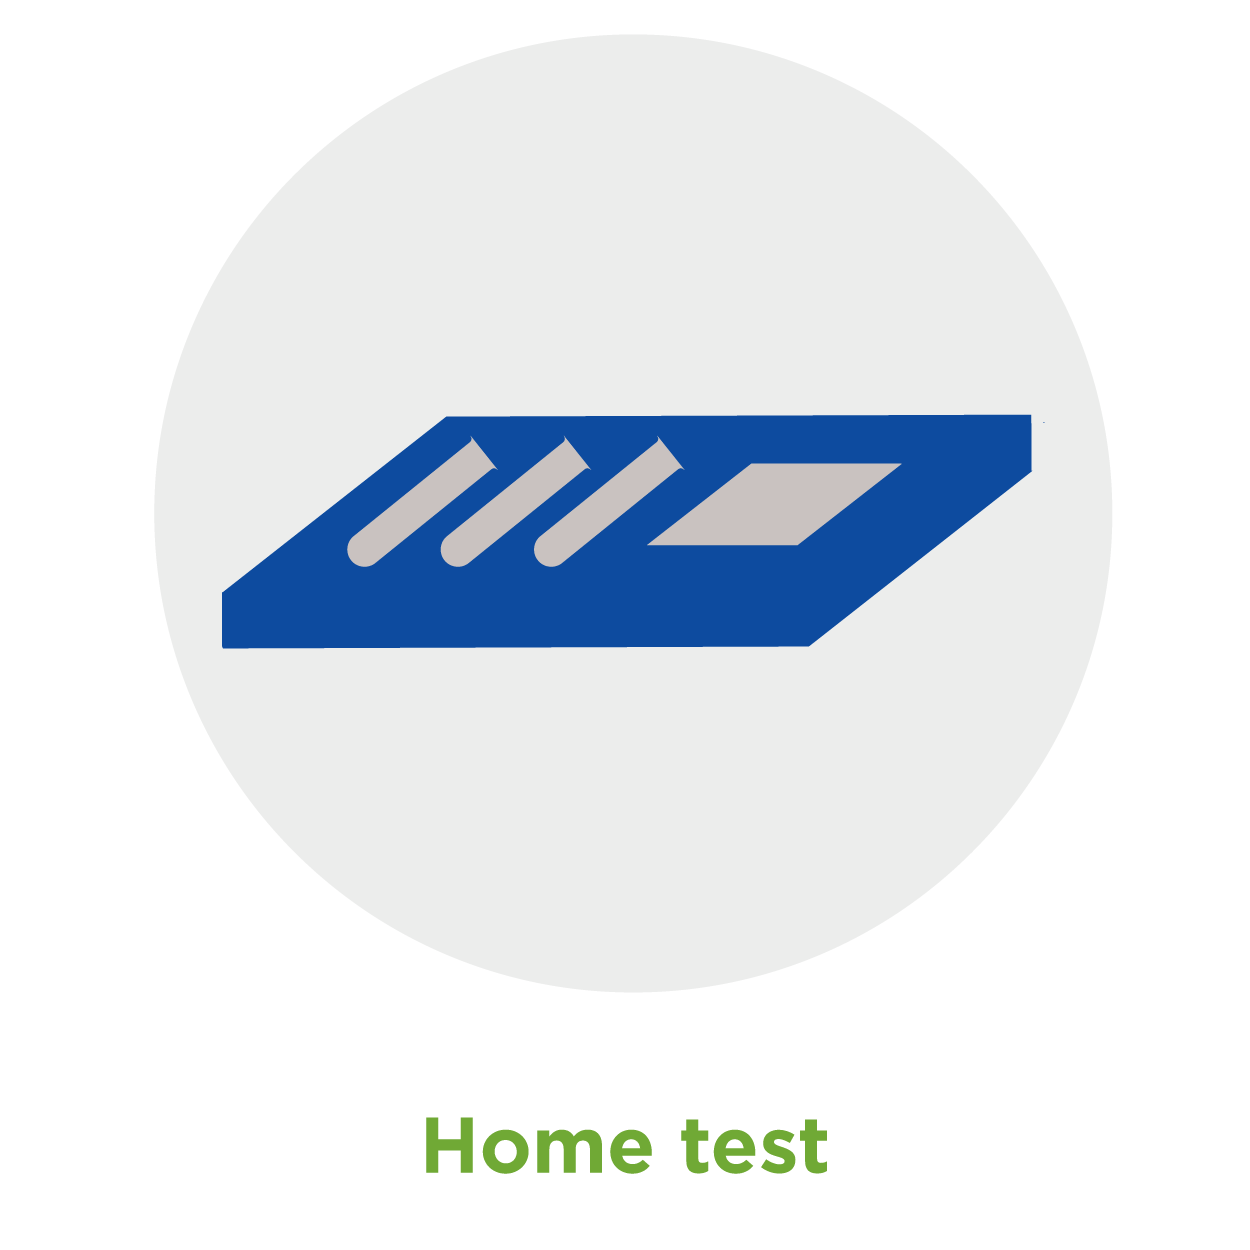 Home test icon